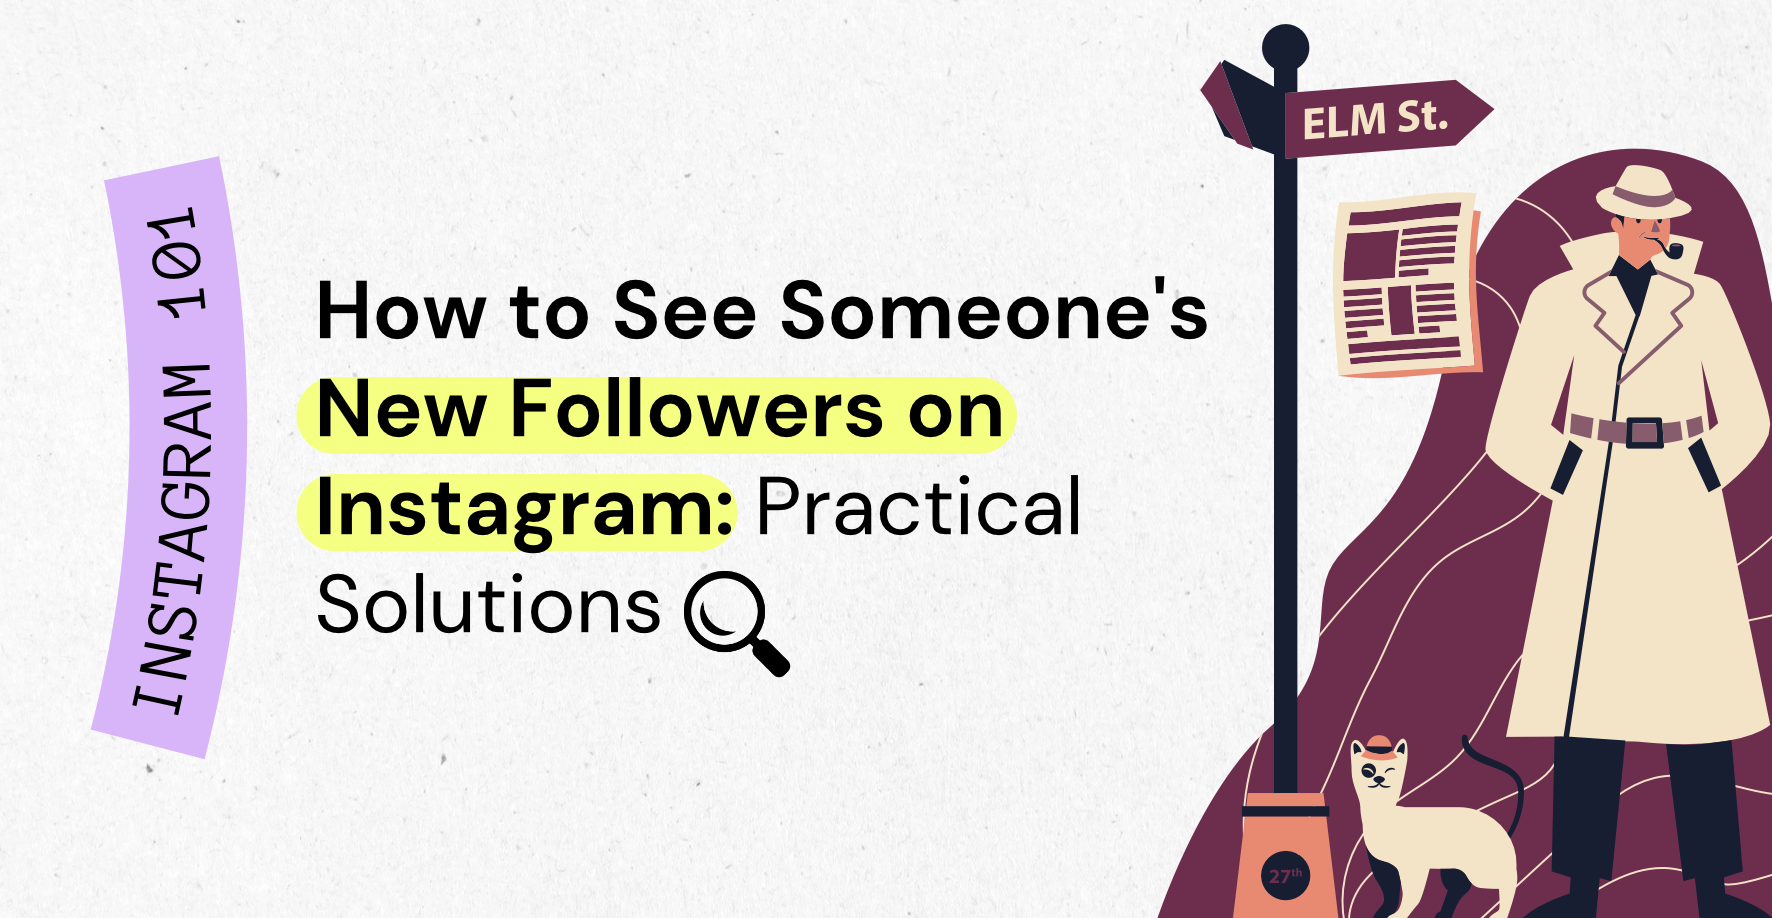 How to See Someone's New Followers on Instagram: Secret Solutions -  IQhashtags - Instagram hashtag search tool